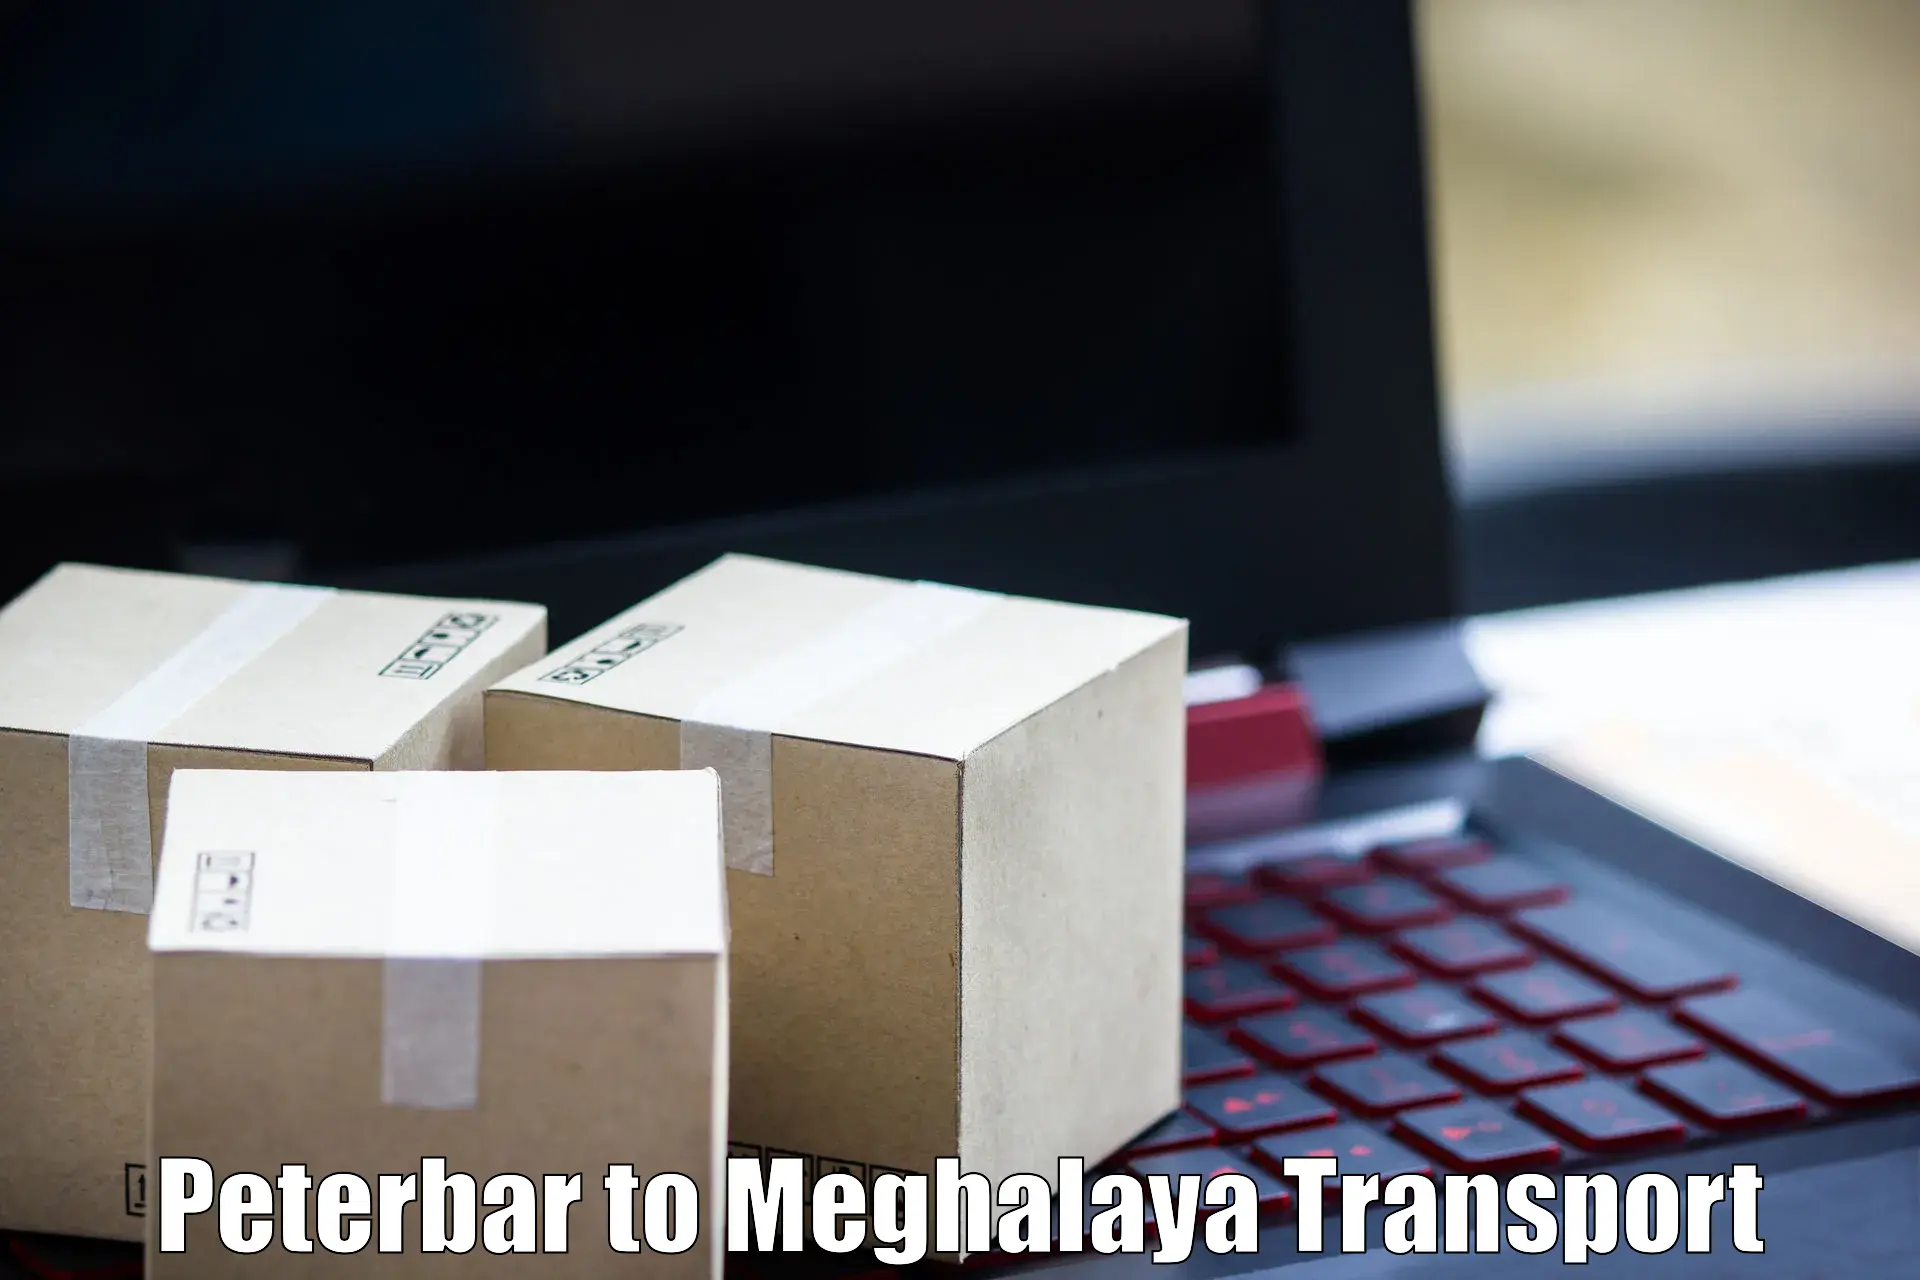 Delivery service Peterbar to Phulbari